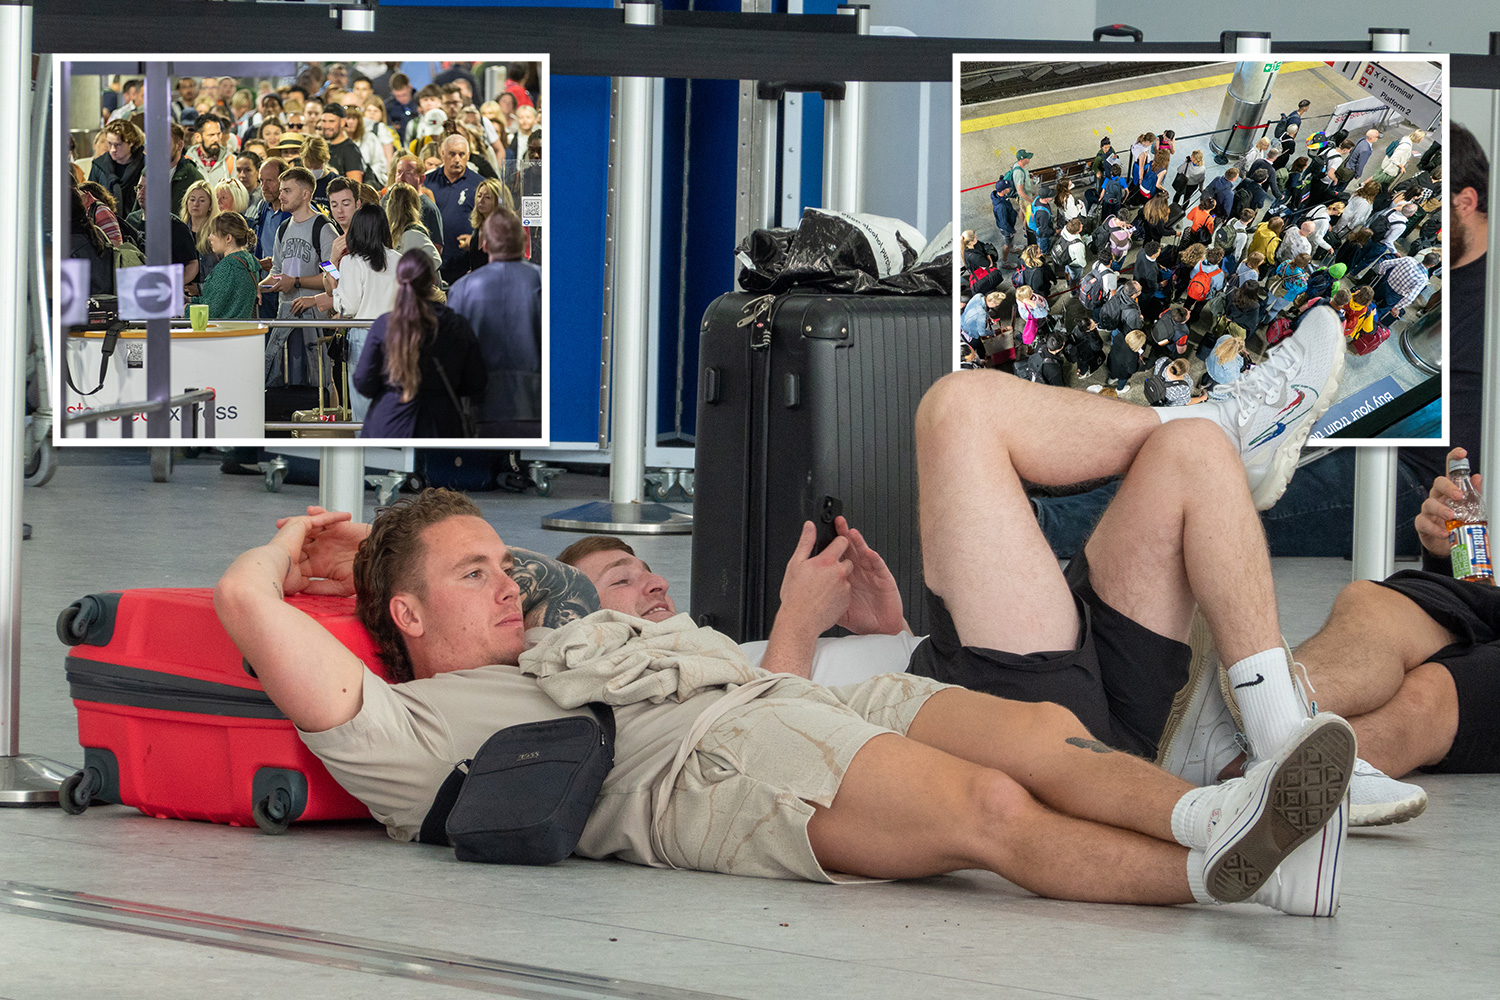 Travel chaos: passengers queue in Stansted airport and sleep on FLOOR to avoid more cancellations